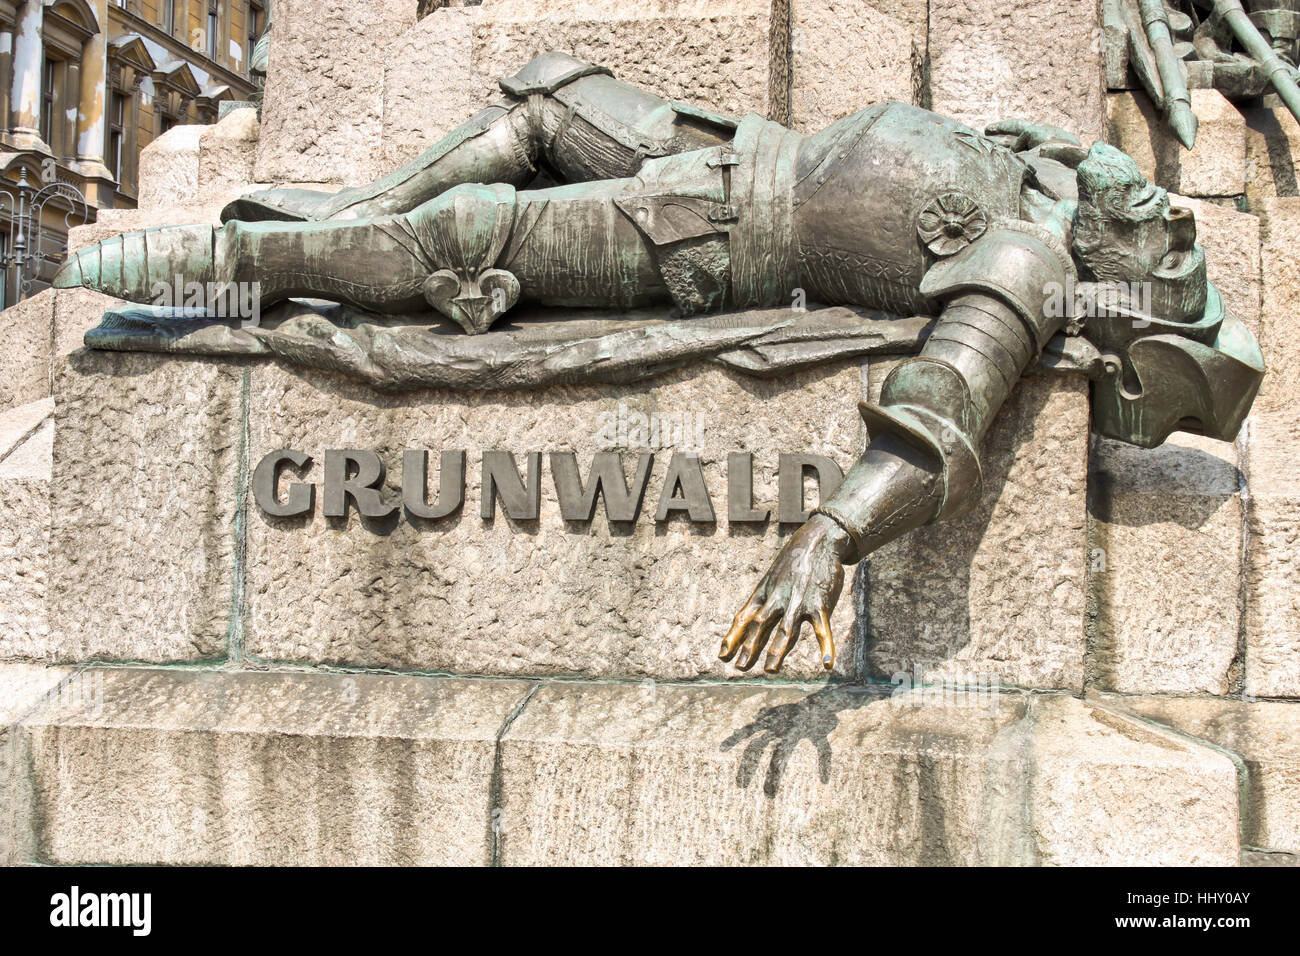 KRAKOW, POLAND - SEPTEMBER 5, 2013: A figure of a defeated knite on the monument dedicated to the battle of Grunwald  in Old town of Krakow. Stock Photo